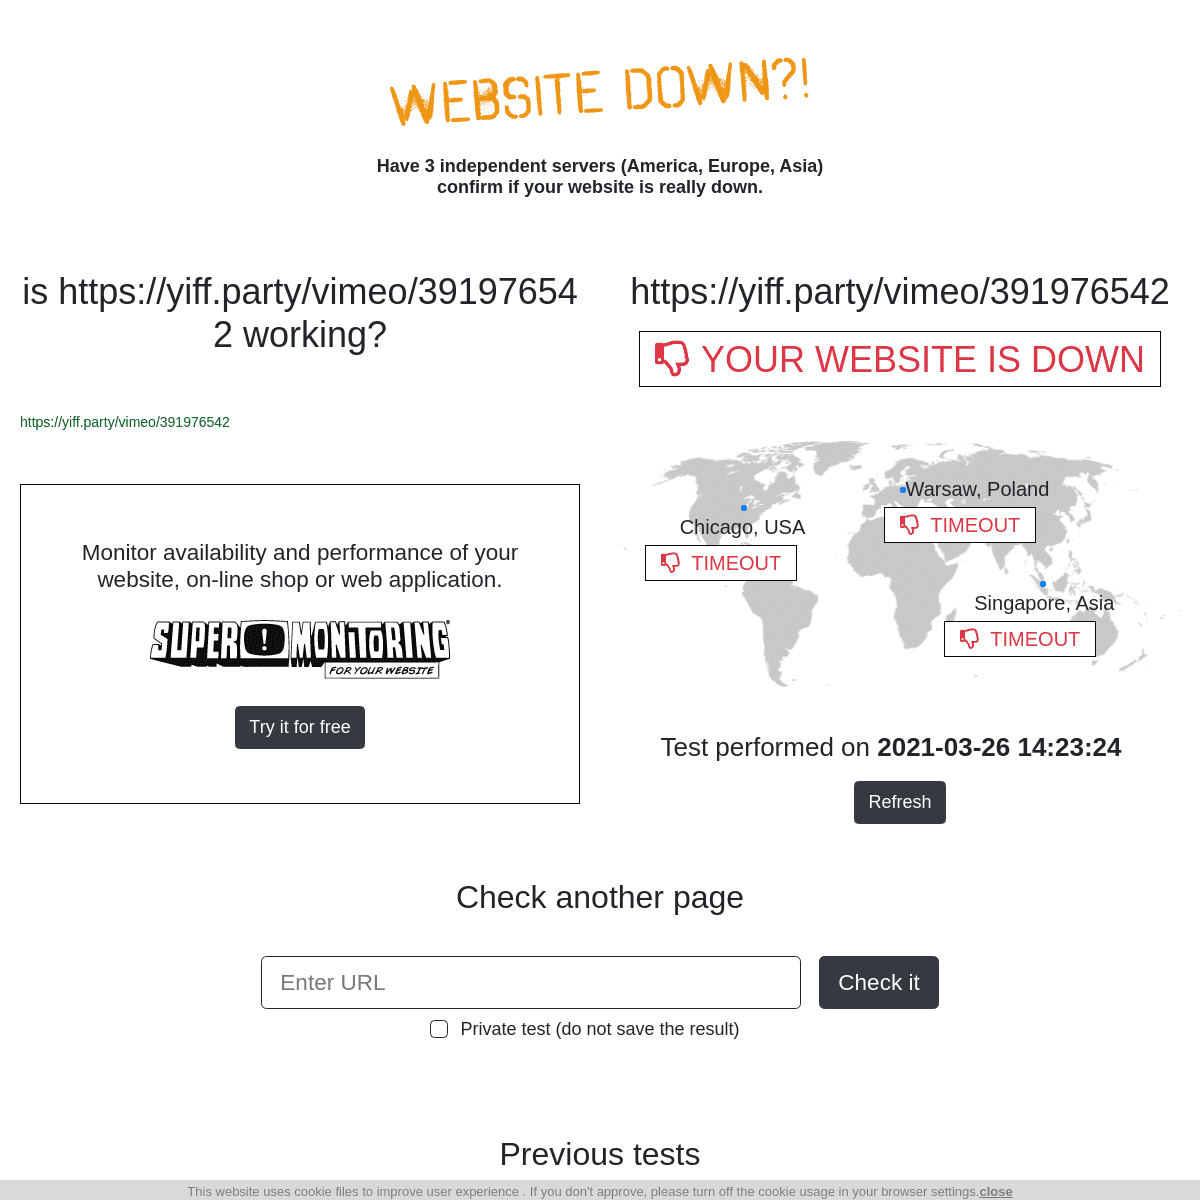 A complete backup of https://www.website-down.com/https%253A%252F%252Fyiff.party%252Fvimeo%252F391976542